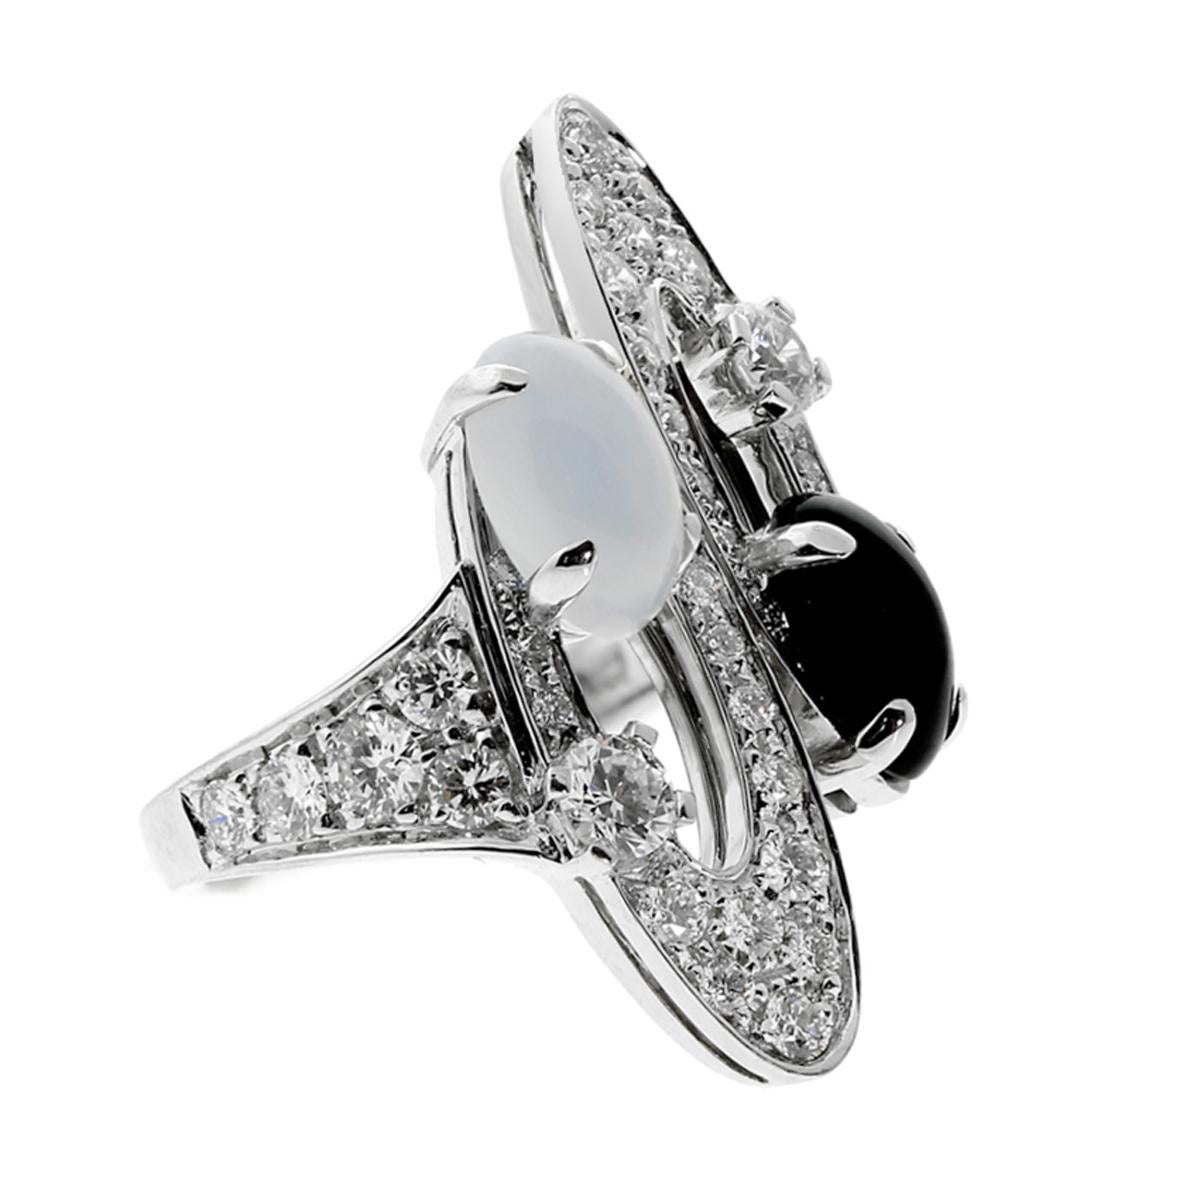 A unique Elisia diamond onyx gold ring from Bulgari, featuring round brilliant cut diamonds, onyx, and chalcedony set in stunning 18k white gold. This ring sparkles and shines and is sure to make an impression. The onyx and chalcedony add a chic